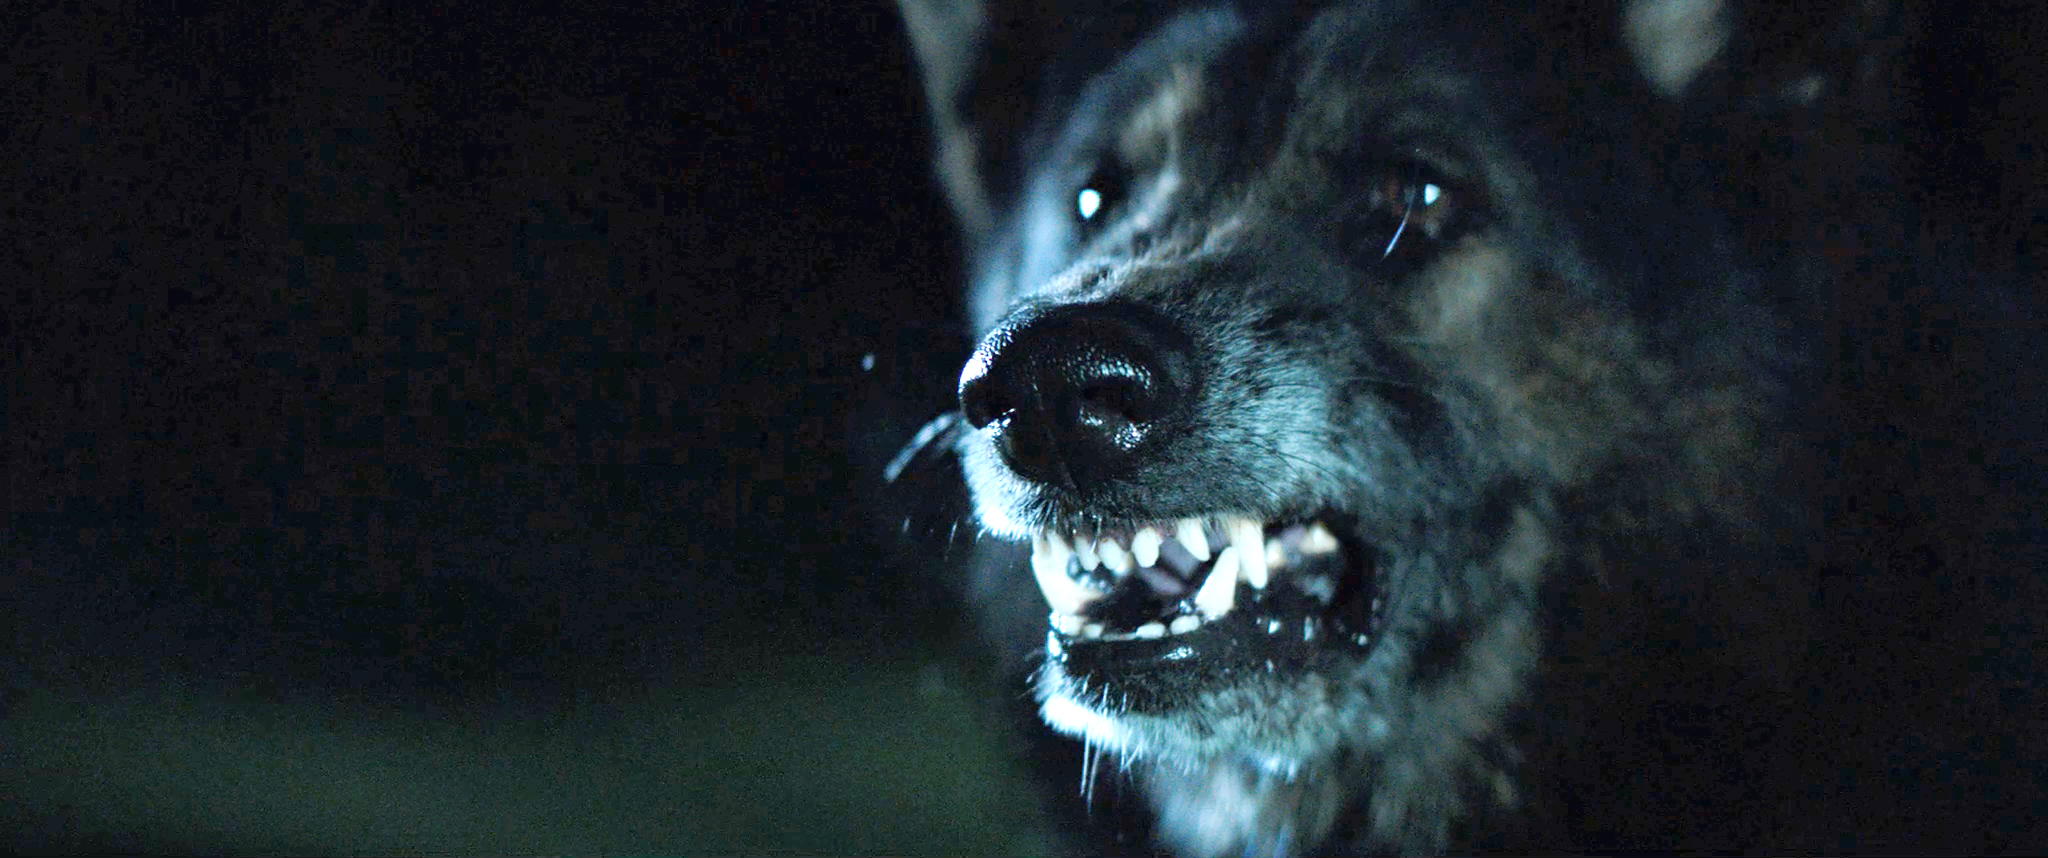 Review] 'The Pack' Delivers a - Disgusting